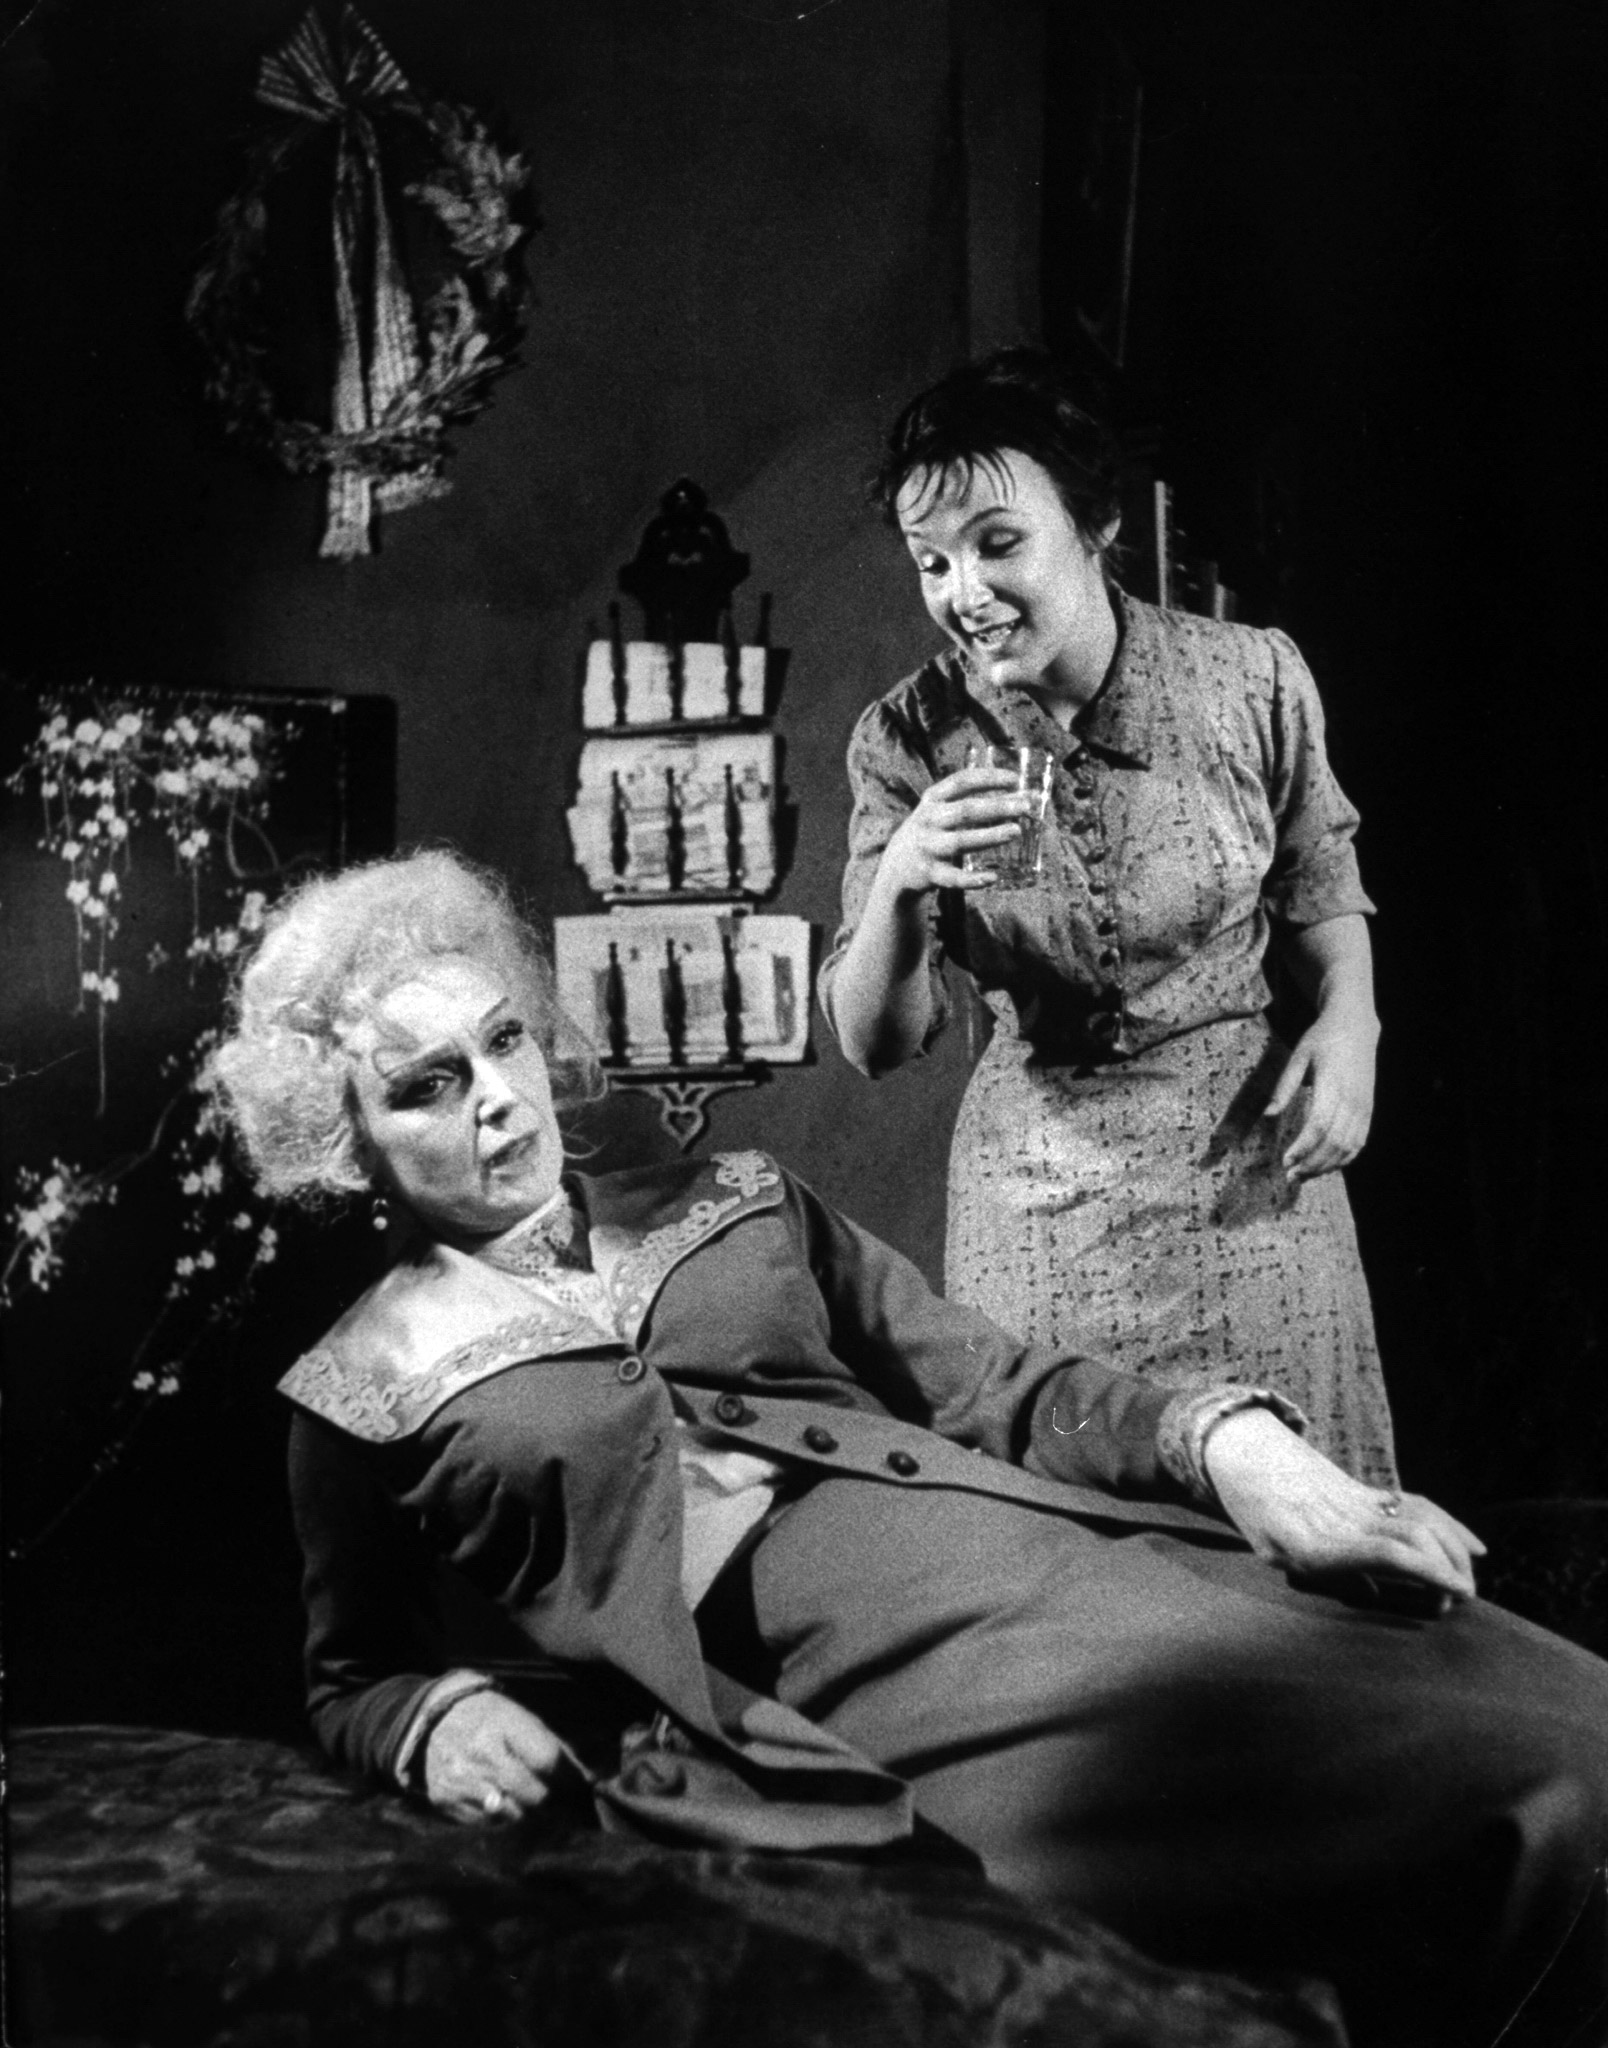 1956 production of Long Day's Journey into Night.